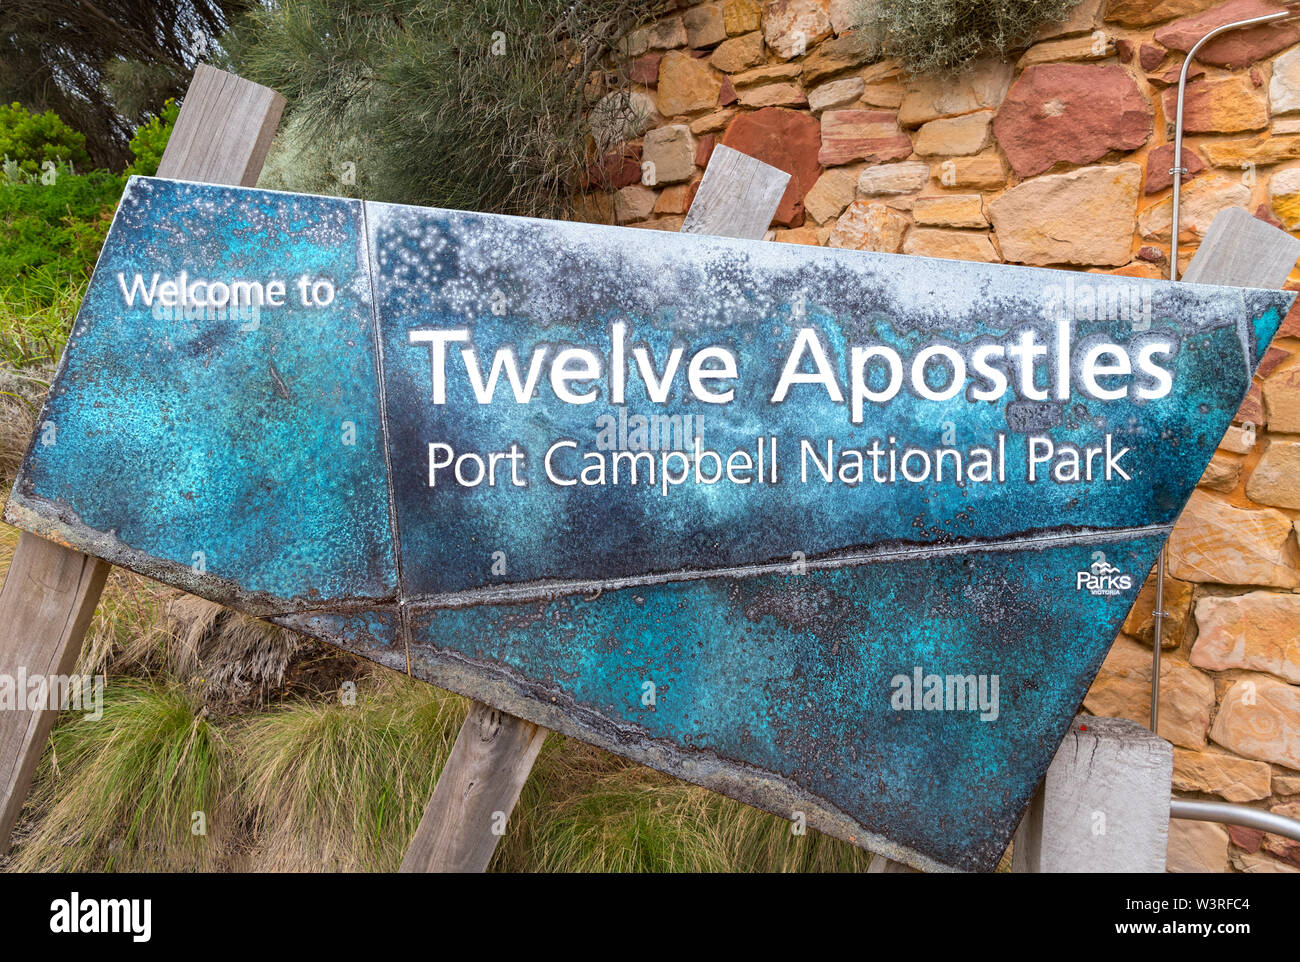 Sign for the Twelve Apostles, Port Campbell National Park, Great Ocean Road, Victoria, Australia Stock Photo